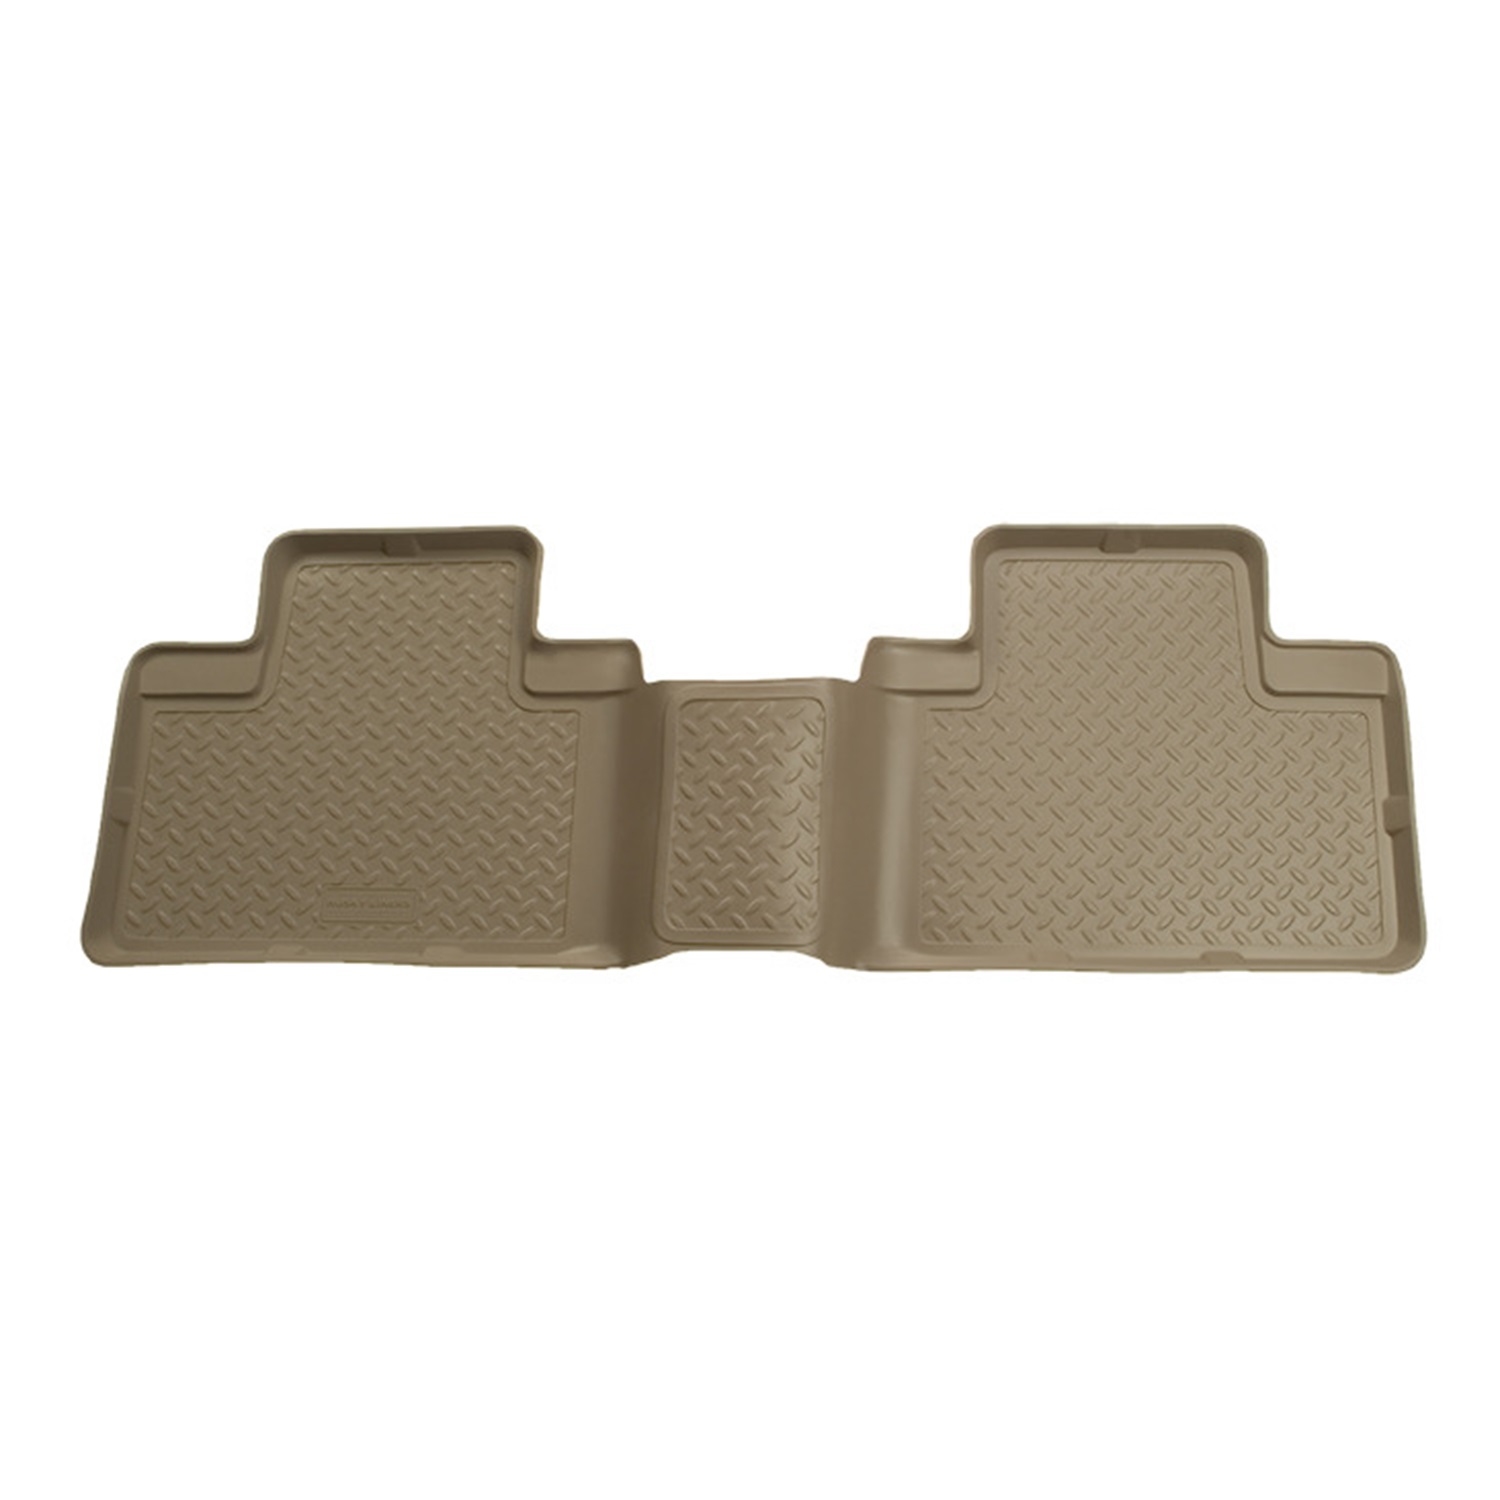 Husky Liners Husky Liners 65513 Classic Style; Floor Liner Fits 04-06 Tundra